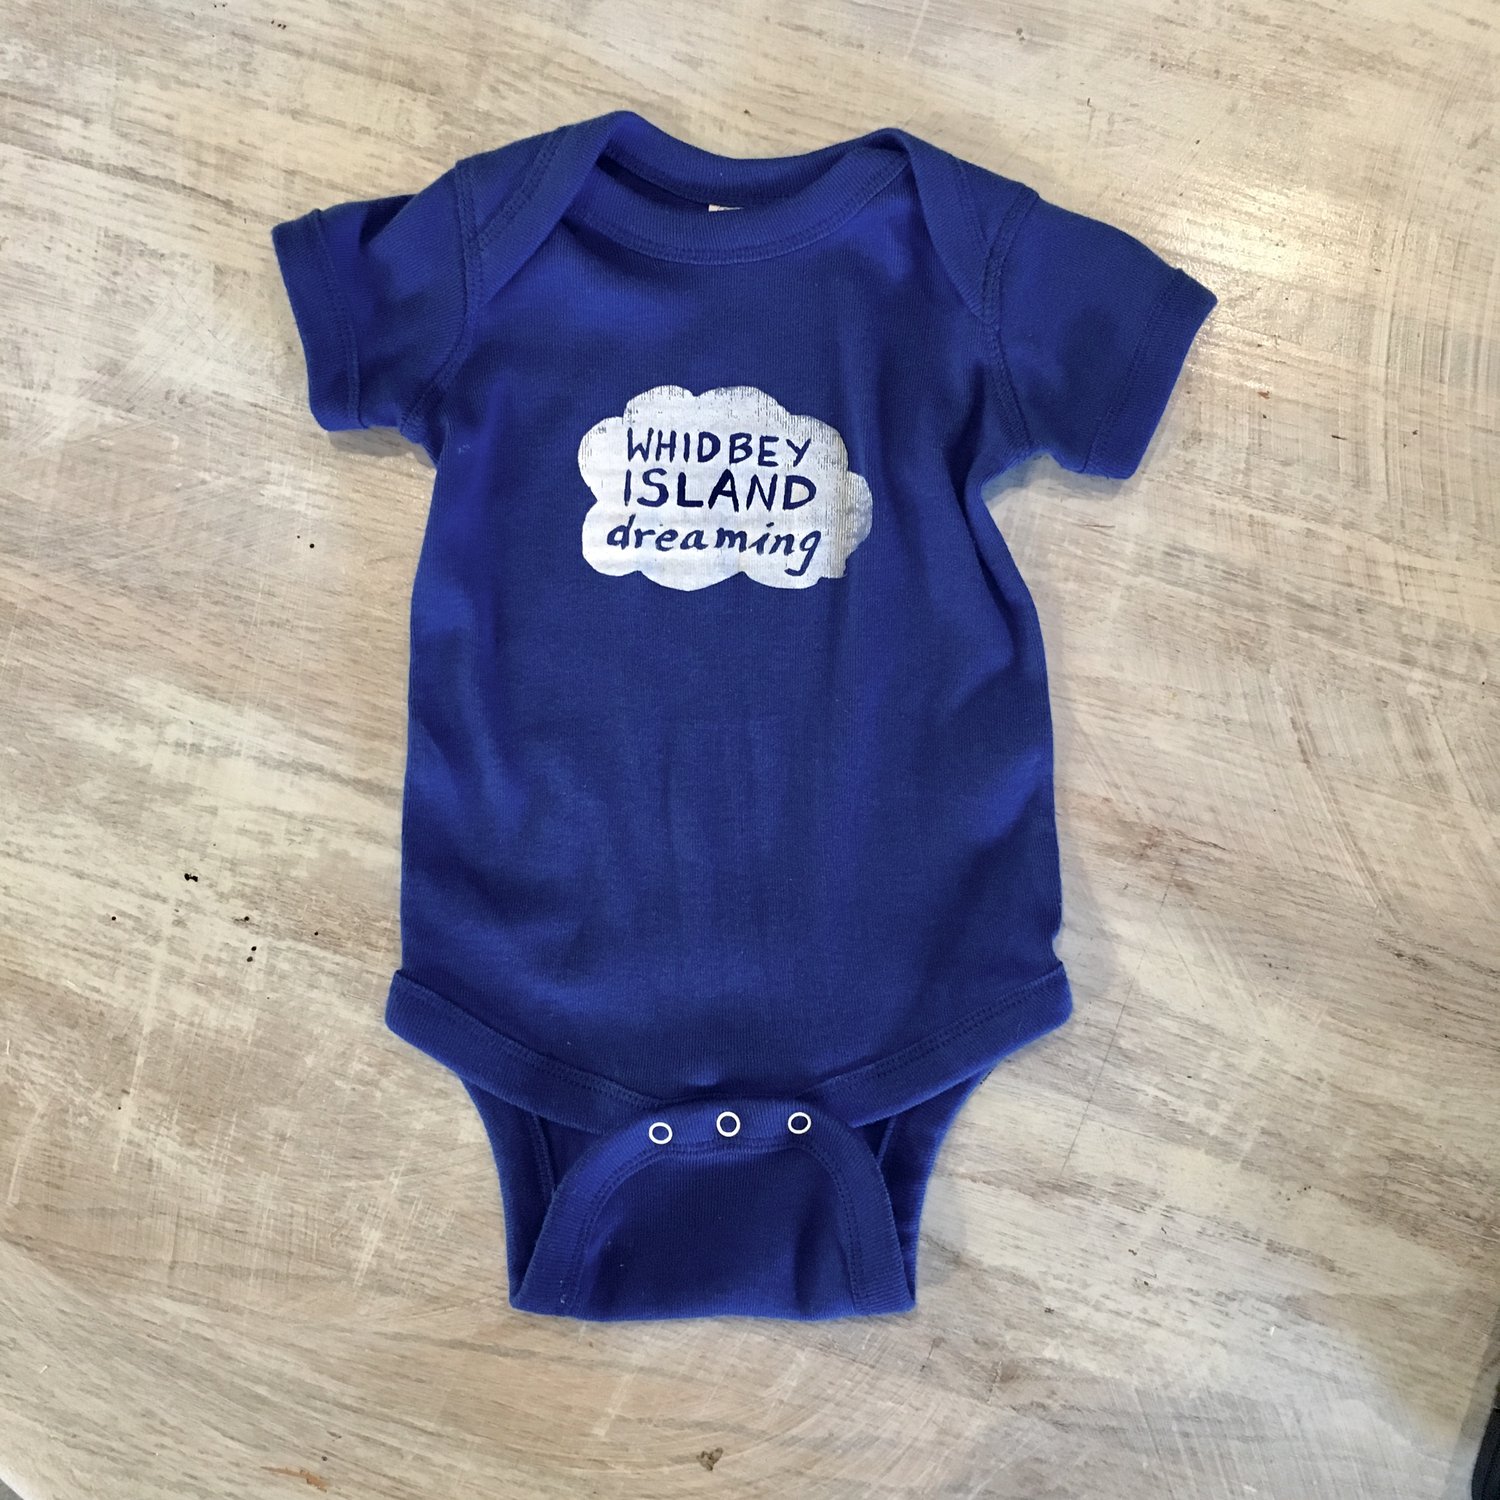 Image of Whidbey Island Dreaming onesie